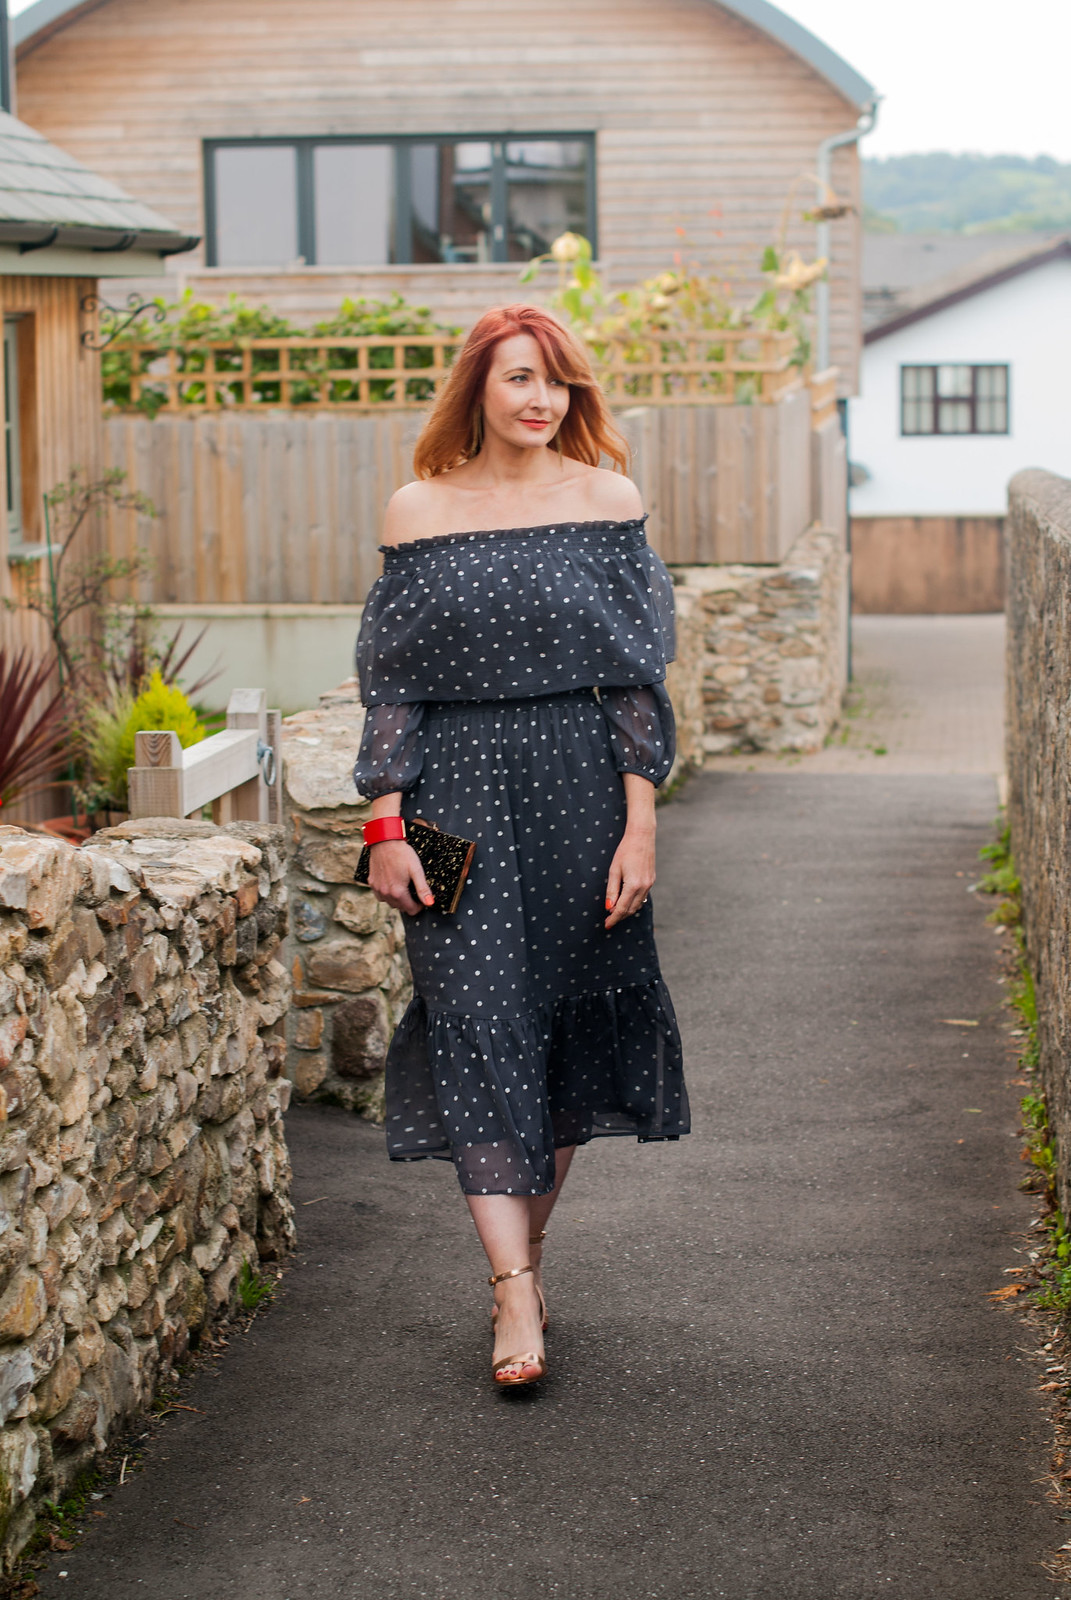 Christmas party dress: Grey off the shoulder ruffled midi dress with silver polka dots | Not Dressed As Lamb, over 40 style